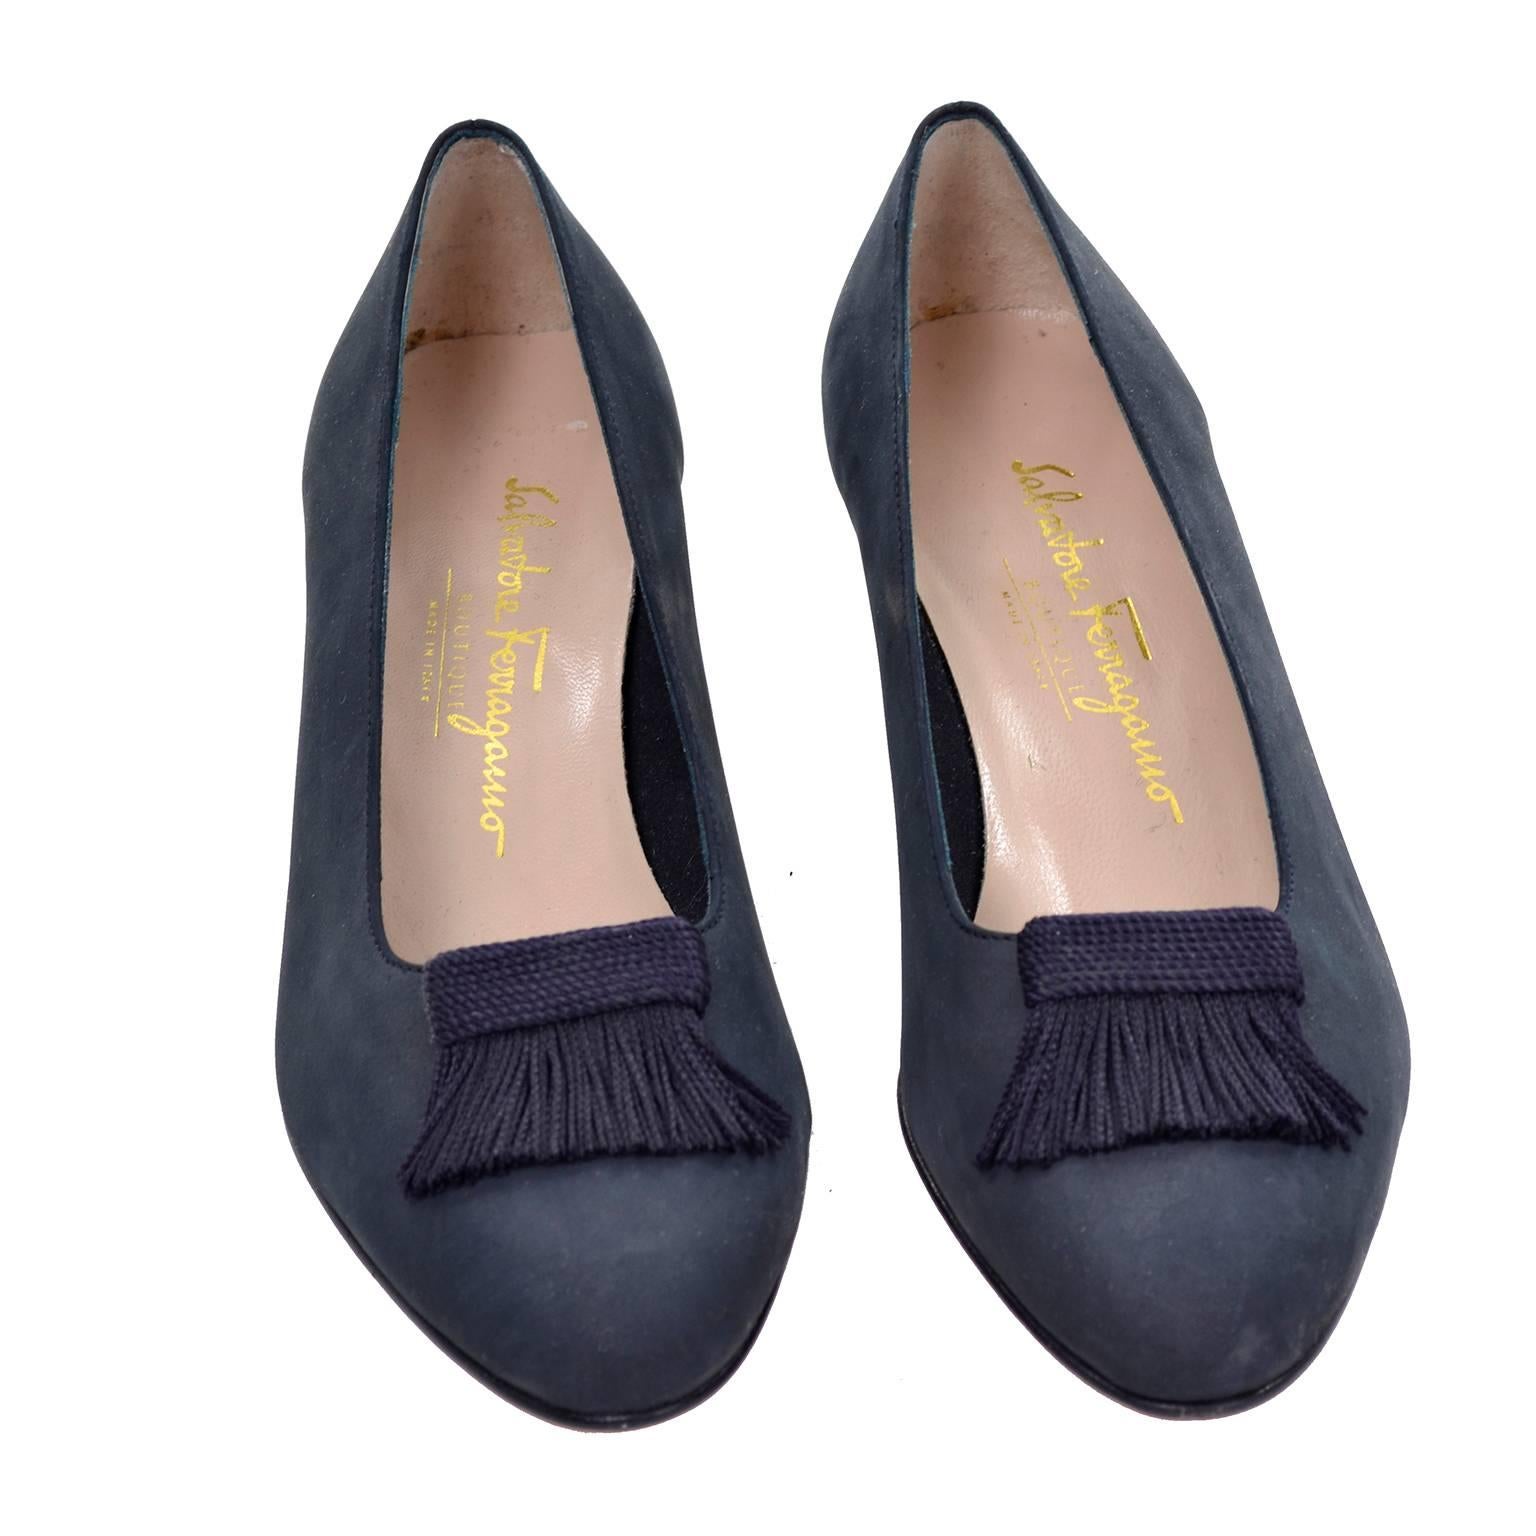 New Vintage Ferragamo Shoes in Navy Blue Suede with Fringed Tassels Size 8B In New Condition In Portland, OR